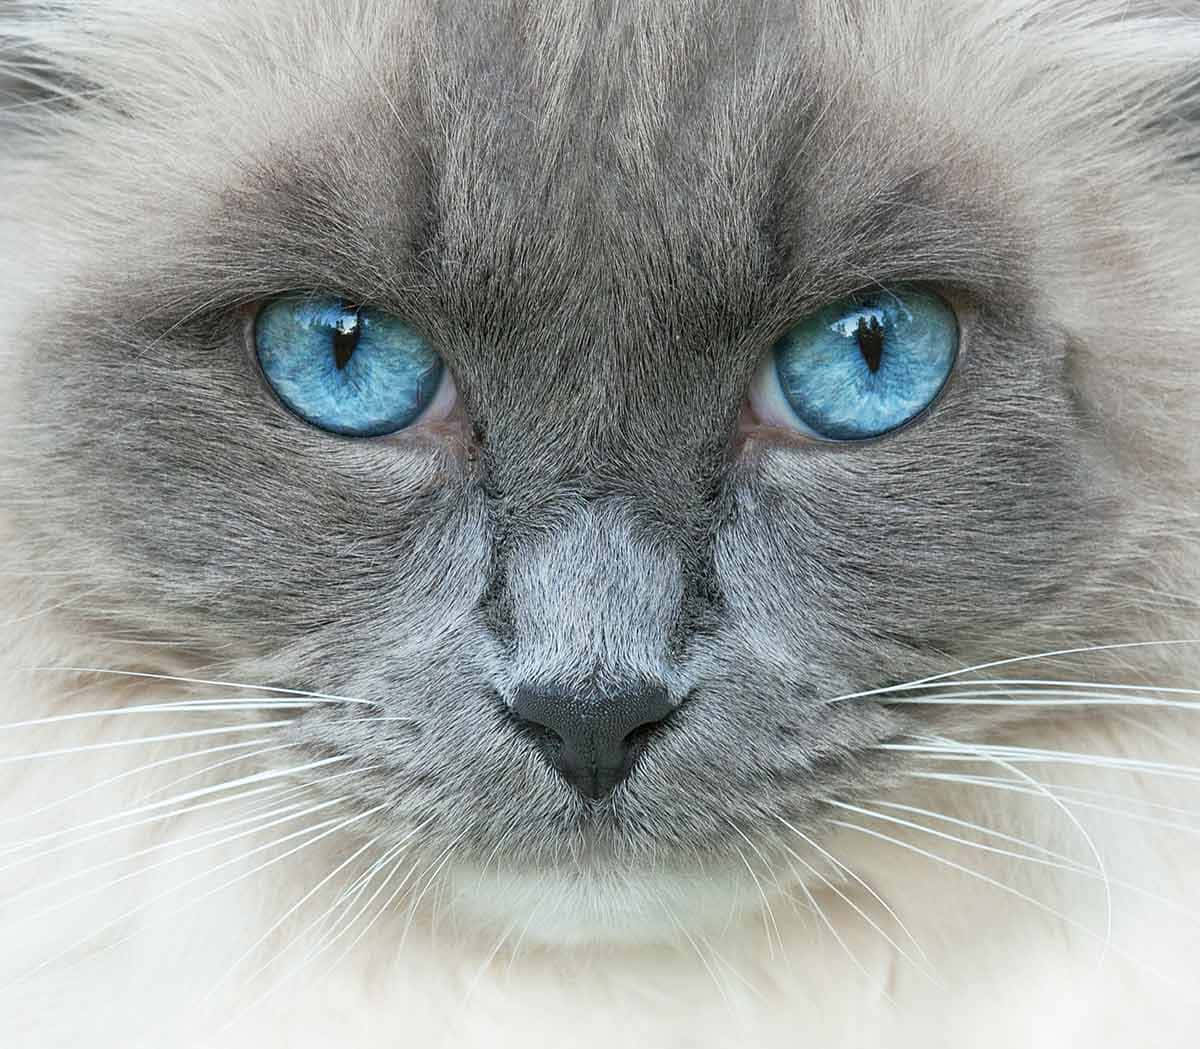 A Cat With Blue Eyes Is Looking At The Camera